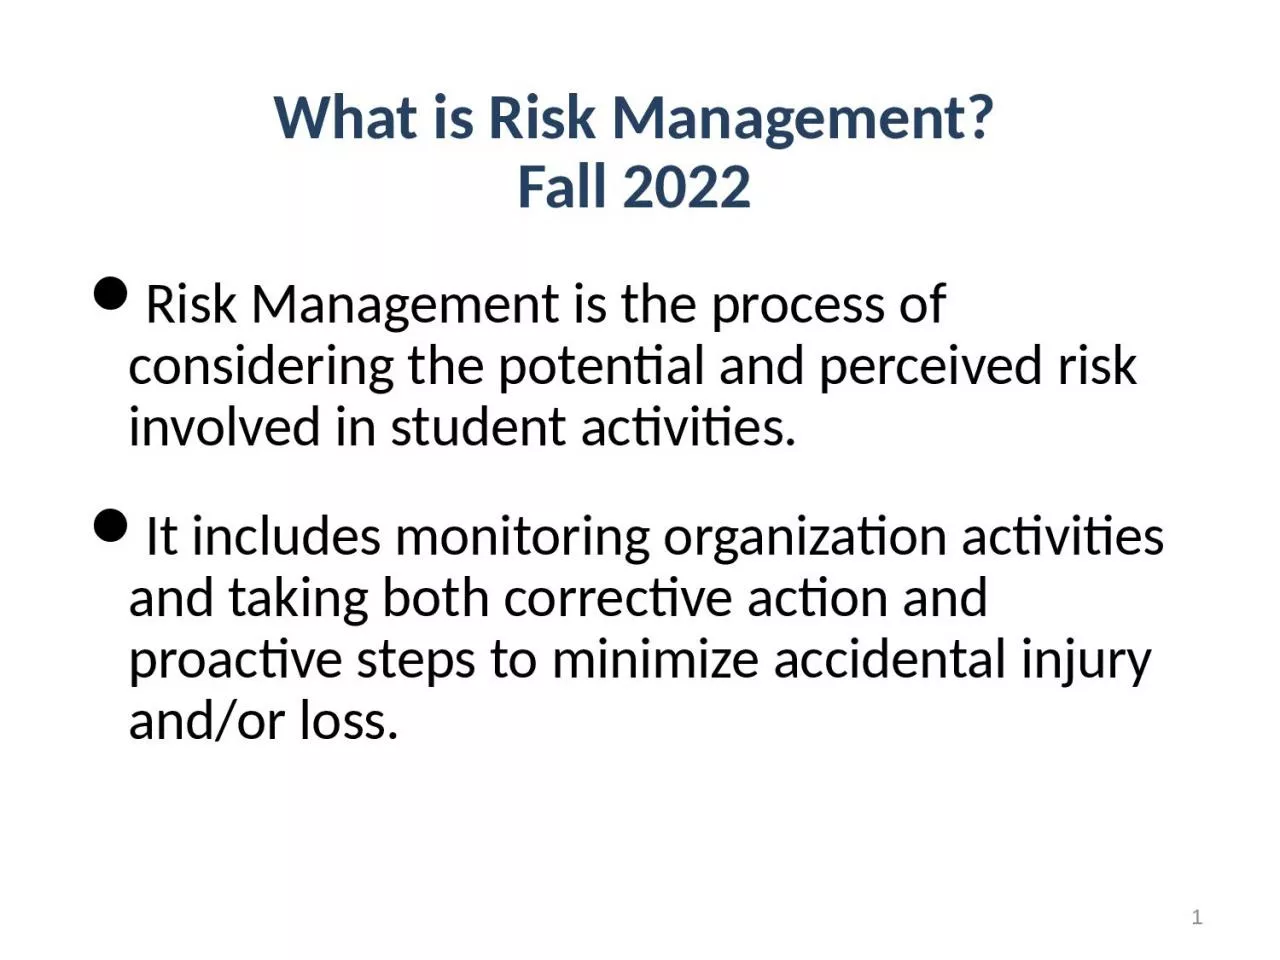 1 Risk Management is the process of considering the potential and perceived risk involved